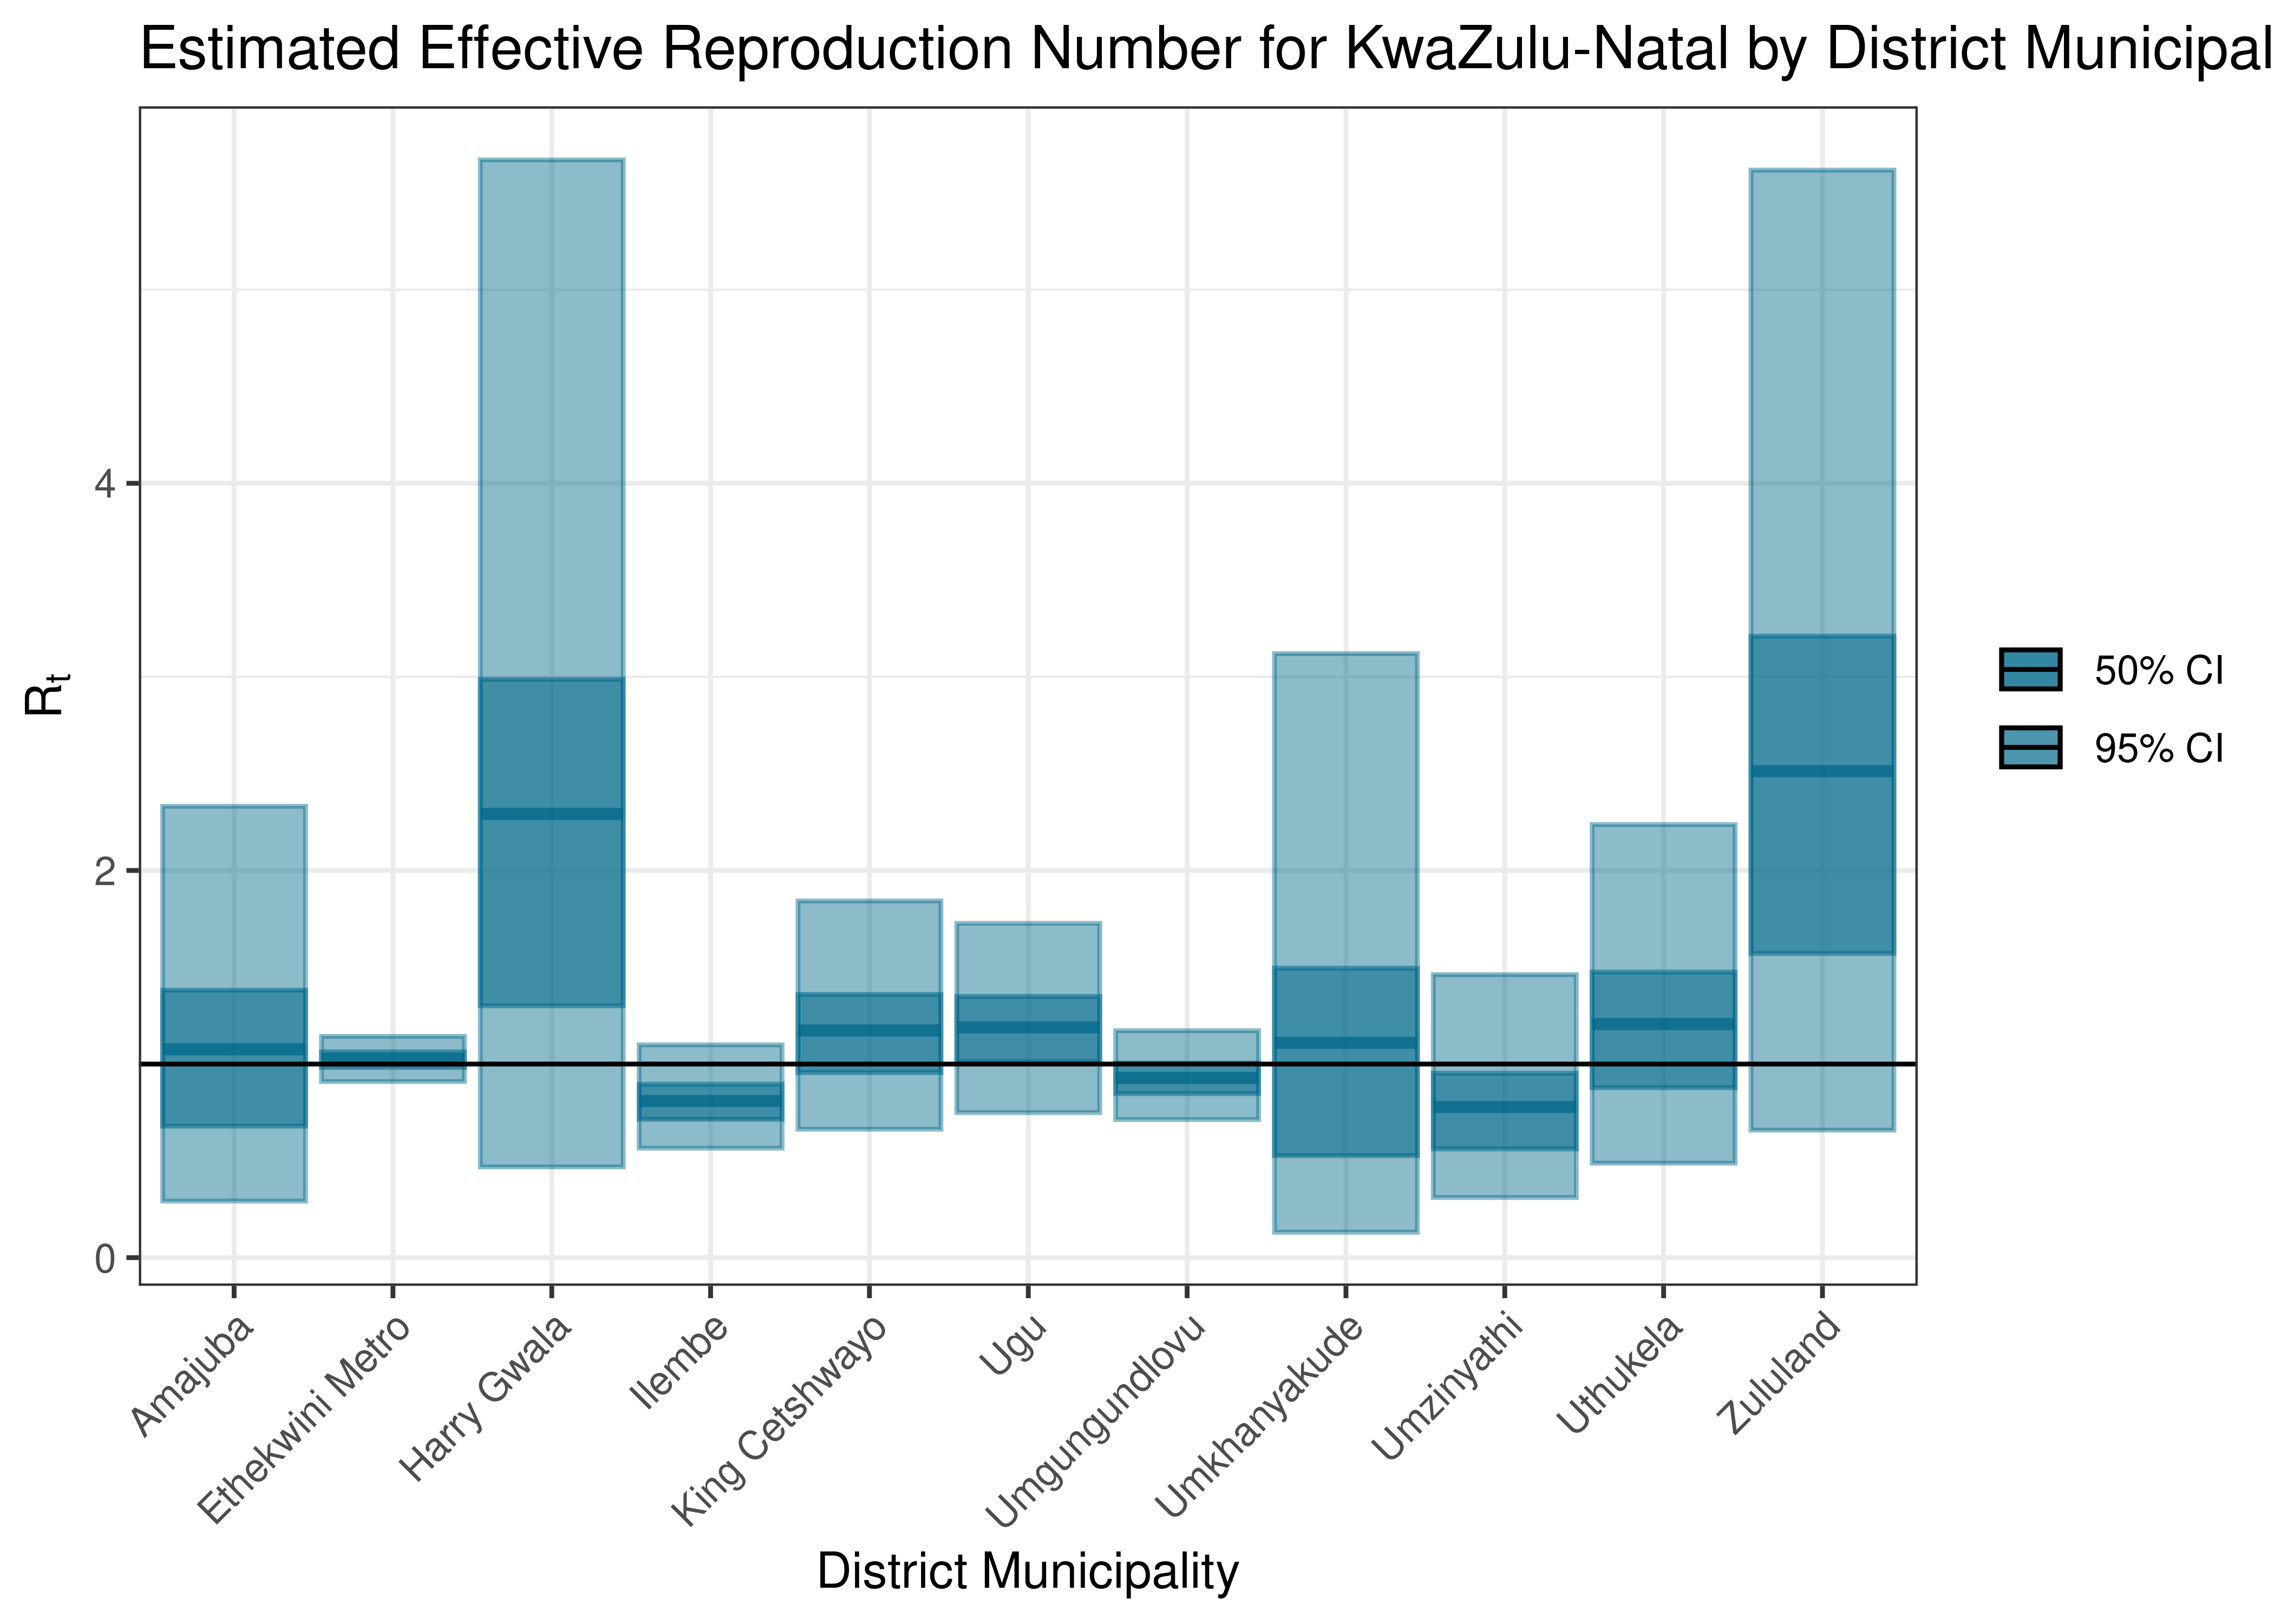 Estimated Effective Reproduction Number for KwaZulu-Natal by District Municipality